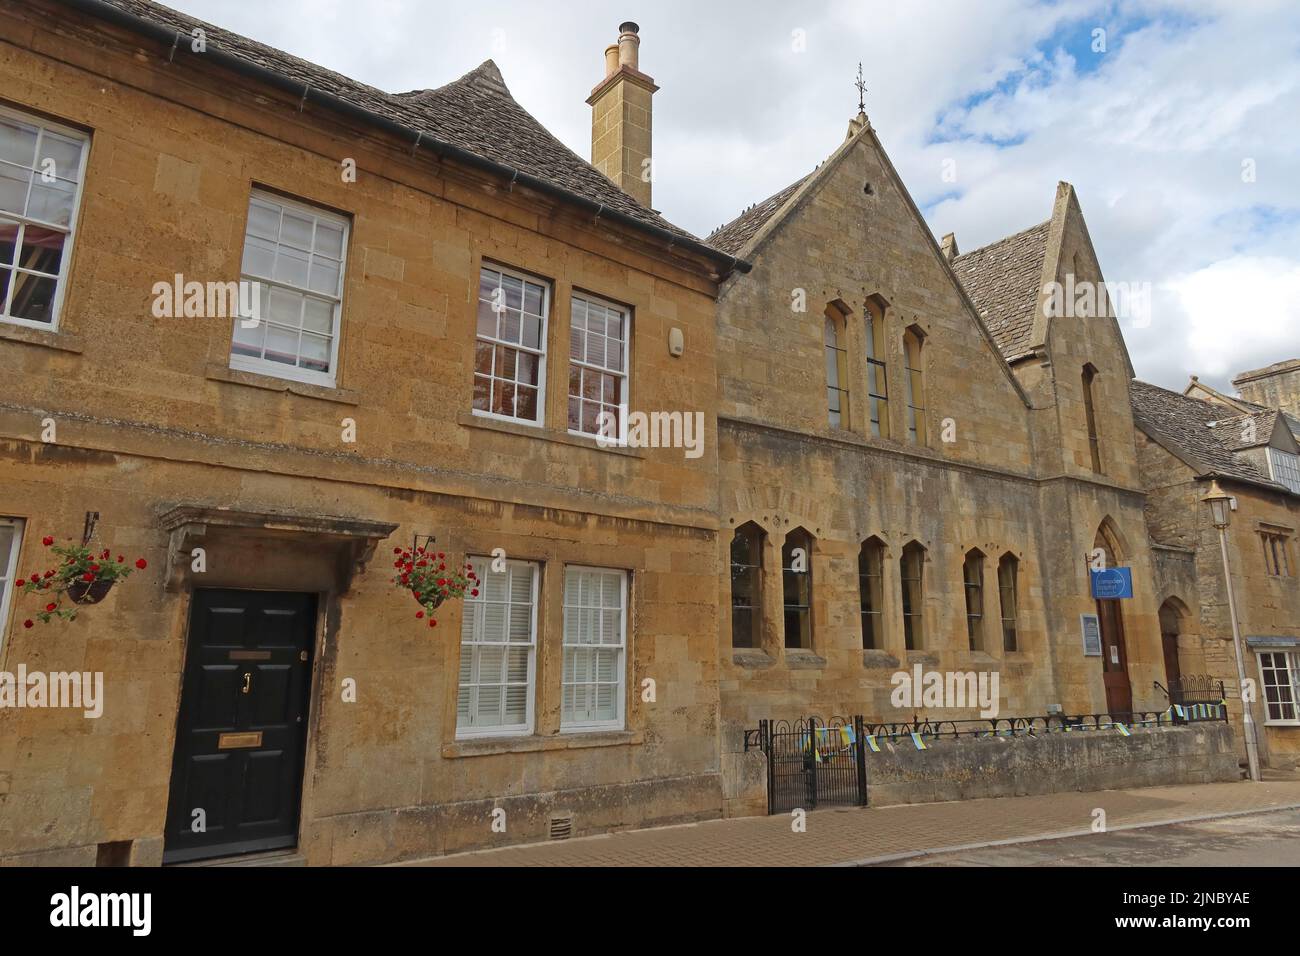 Back Ends, Chipping Campden, Cotswolds, Gloucestershire, England, UK, GL55 6AT Stock Photo